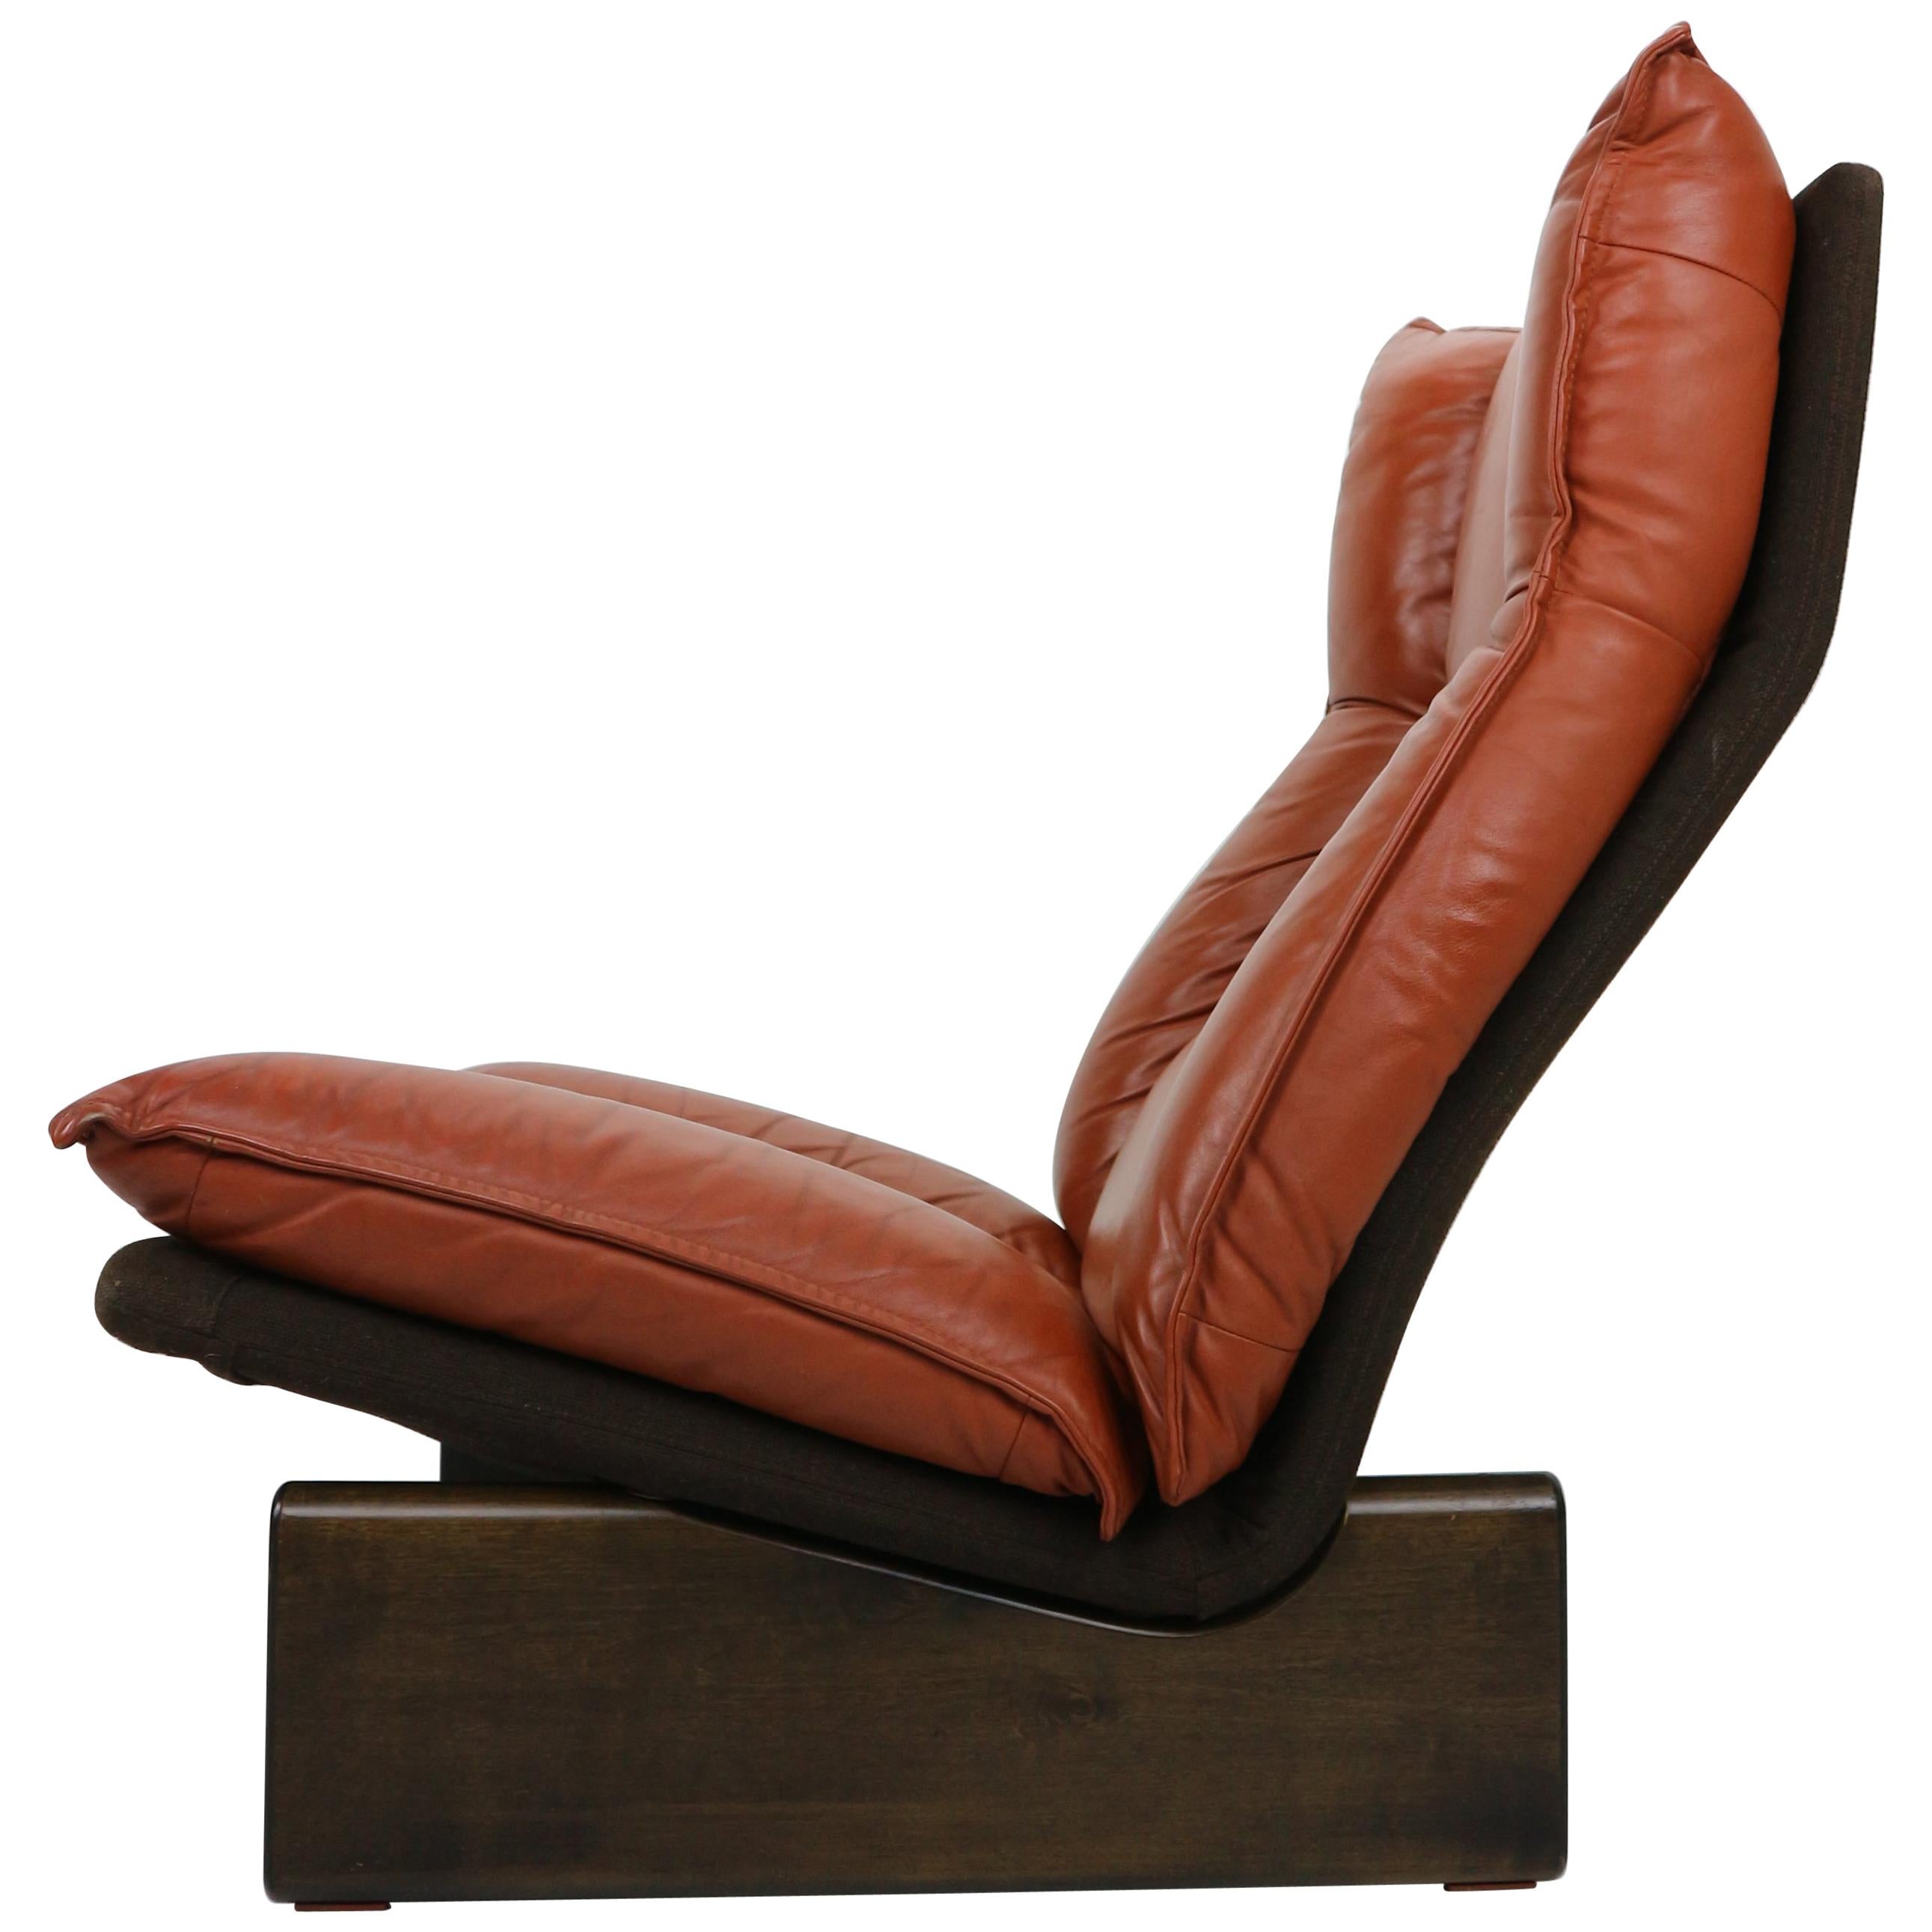 Cognac Leather and Wood Lounge Chair, Dutch Modern Design, 1970s